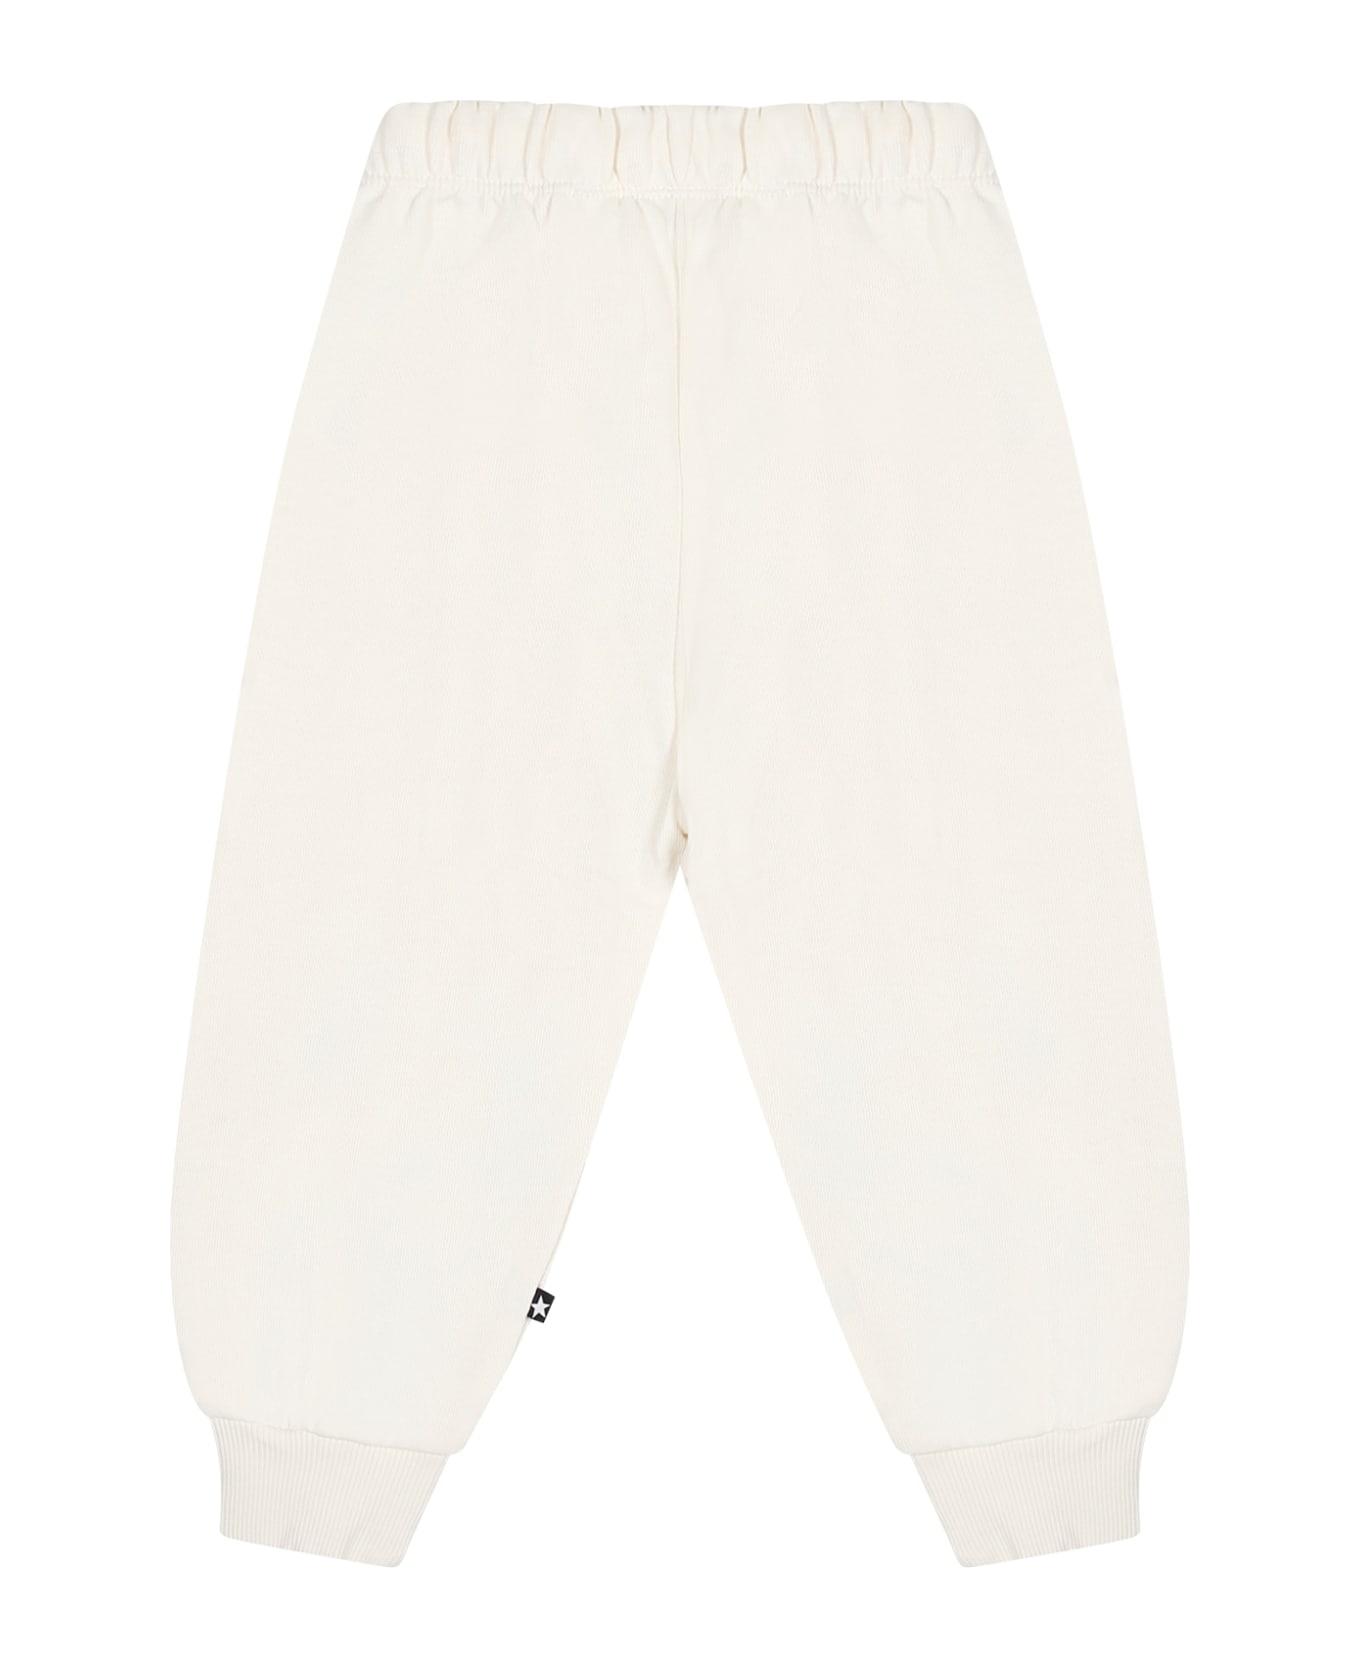 Molo White Sports Trousers For Babykids - White ボトムス